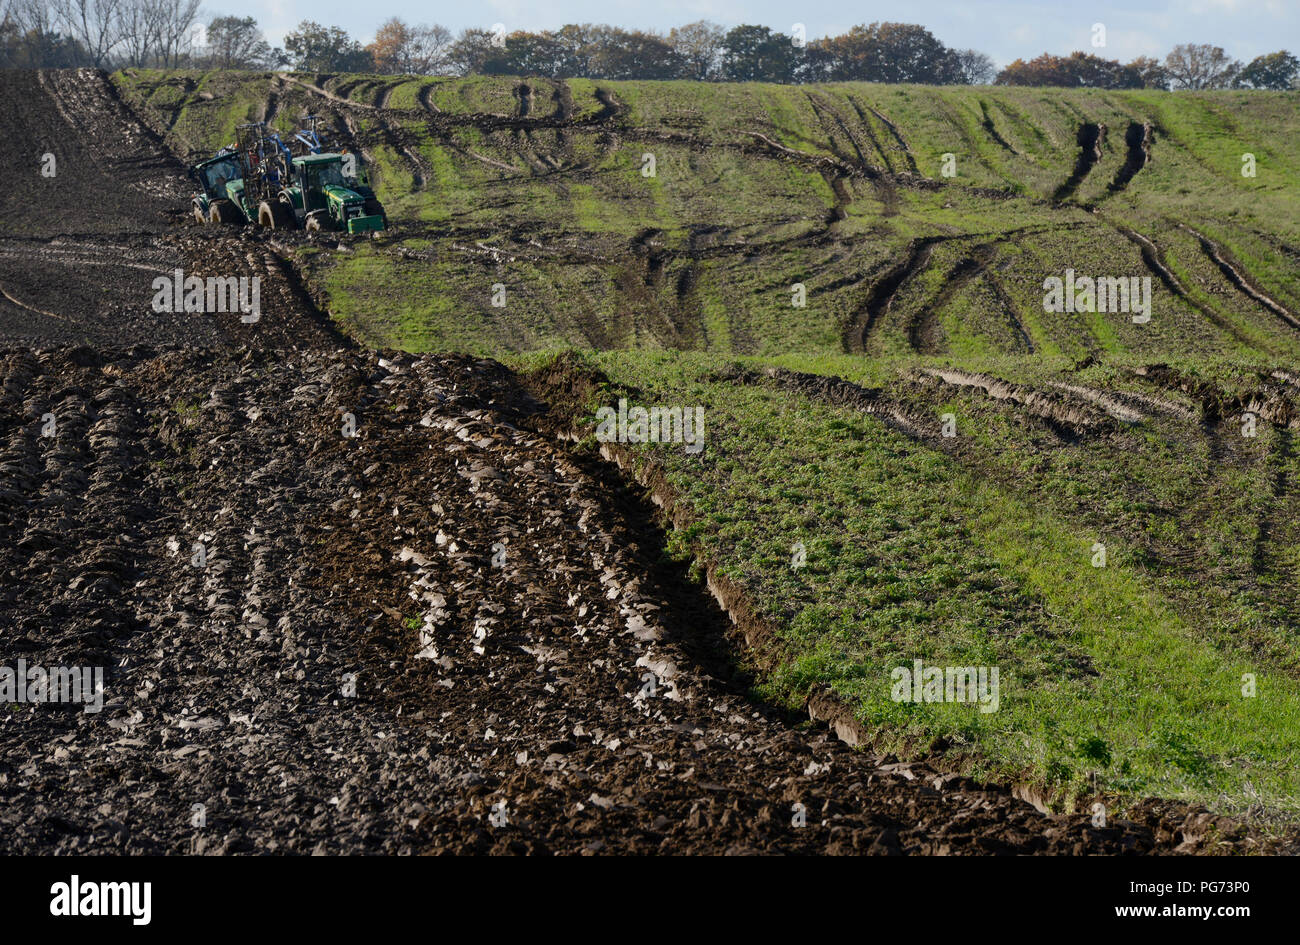 Germany, farming with extreme wet soil conditions after heavy rainfall for days, two big John Deere tractors deadlocked in the furrow Stock Photo